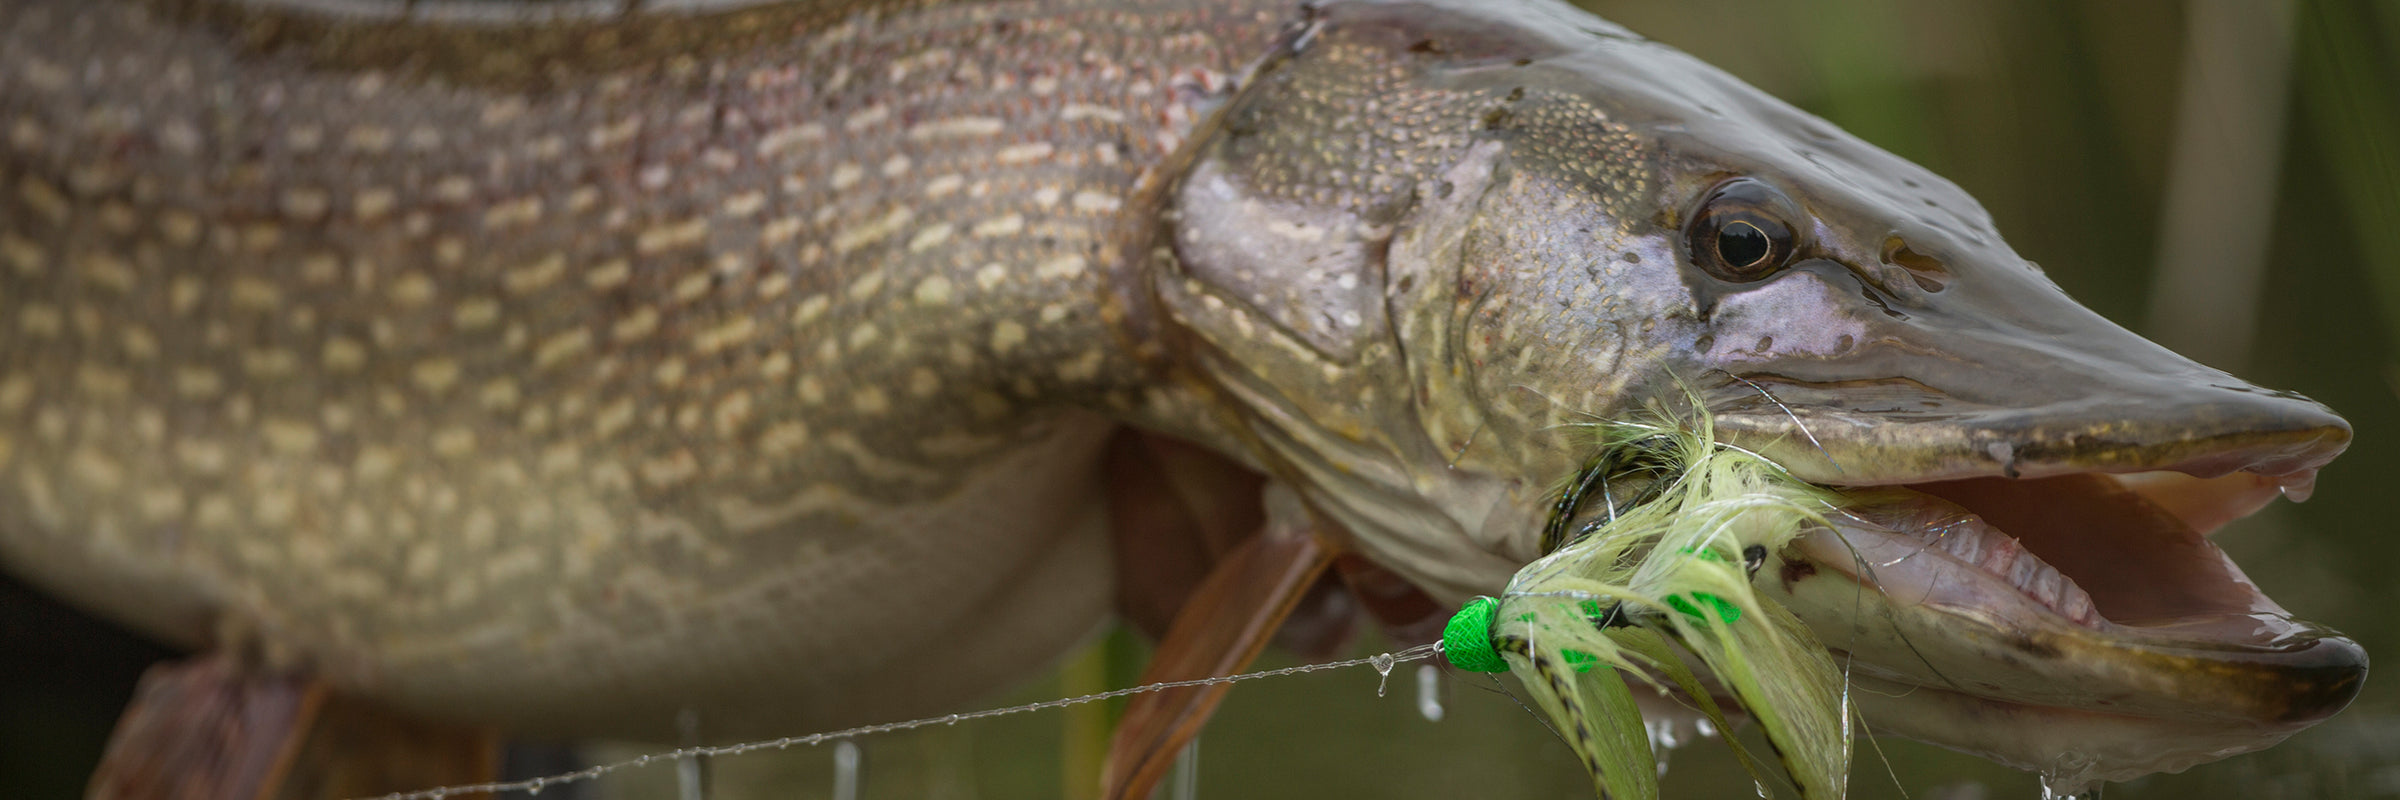 Pike & Musky on the Fly Collection – Out Fly Fishing